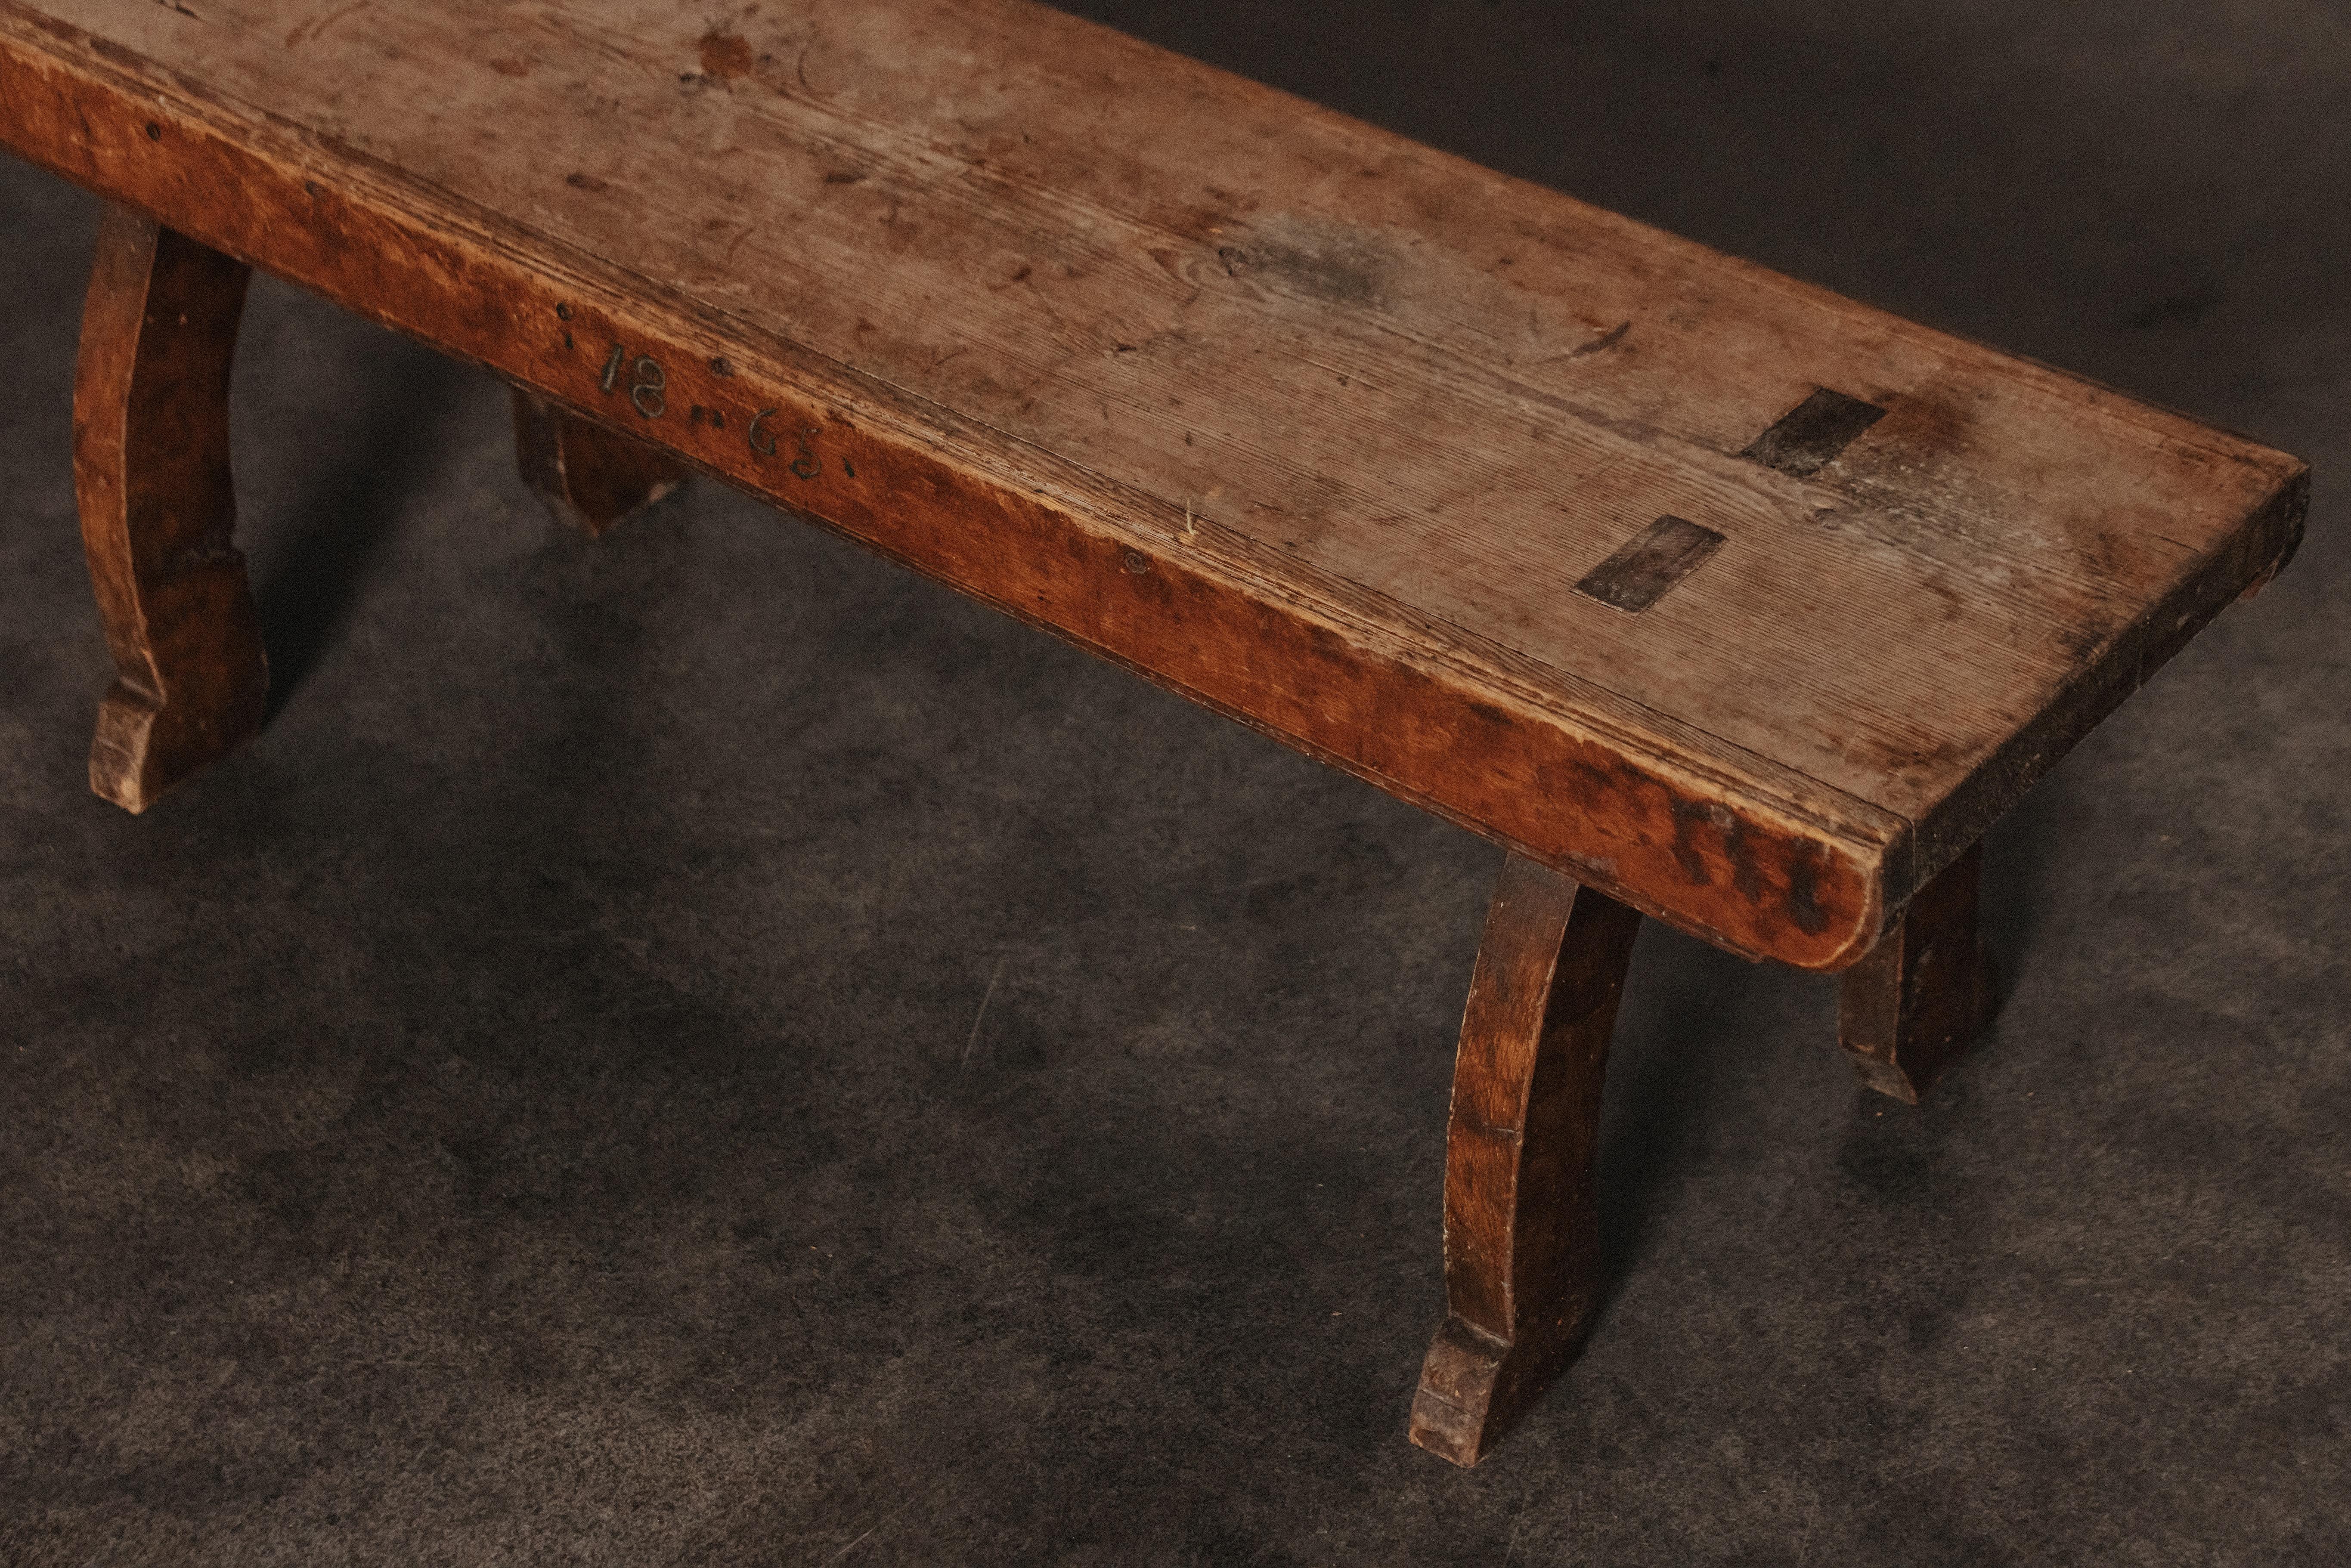 Primitive Pine Bench From Sweden, Circa 1850.  Solid pine construction with superb original patina and wear.